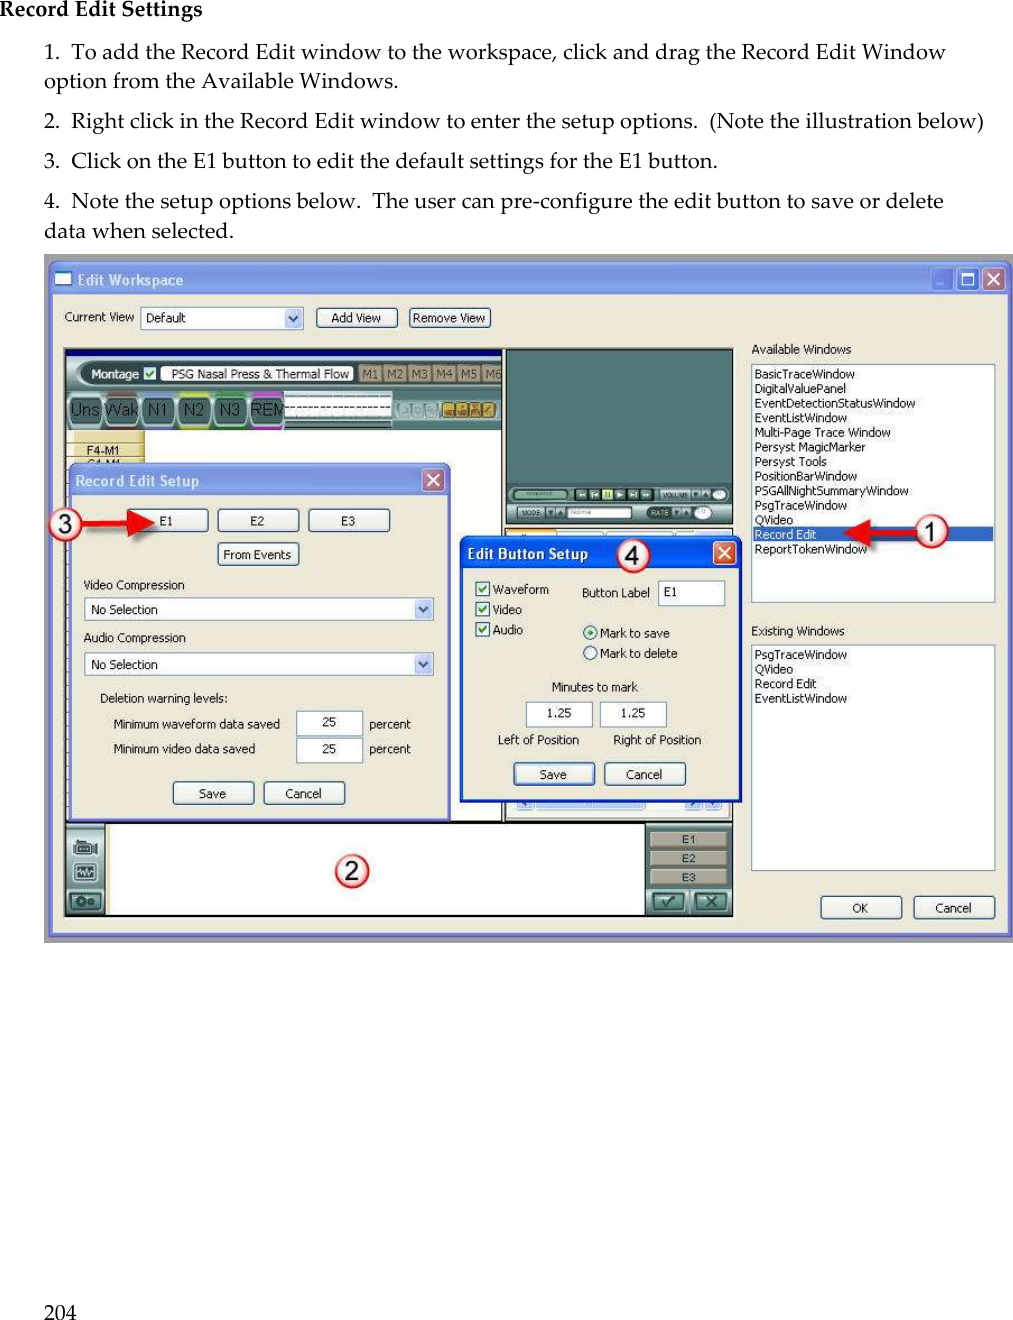 204   Record Edit Settings 1.  To add the Record Edit window to the workspace, click and drag the Record Edit Window option from the Available Windows.   2.  Right click in the Record Edit window to enter the setup options.  (Note the illustration below) 3.  Click on the E1 button to edit the default settings for the E1 button. 4.  Note the setup options below.  The user can pre-configure the edit button to save or delete data when selected.  